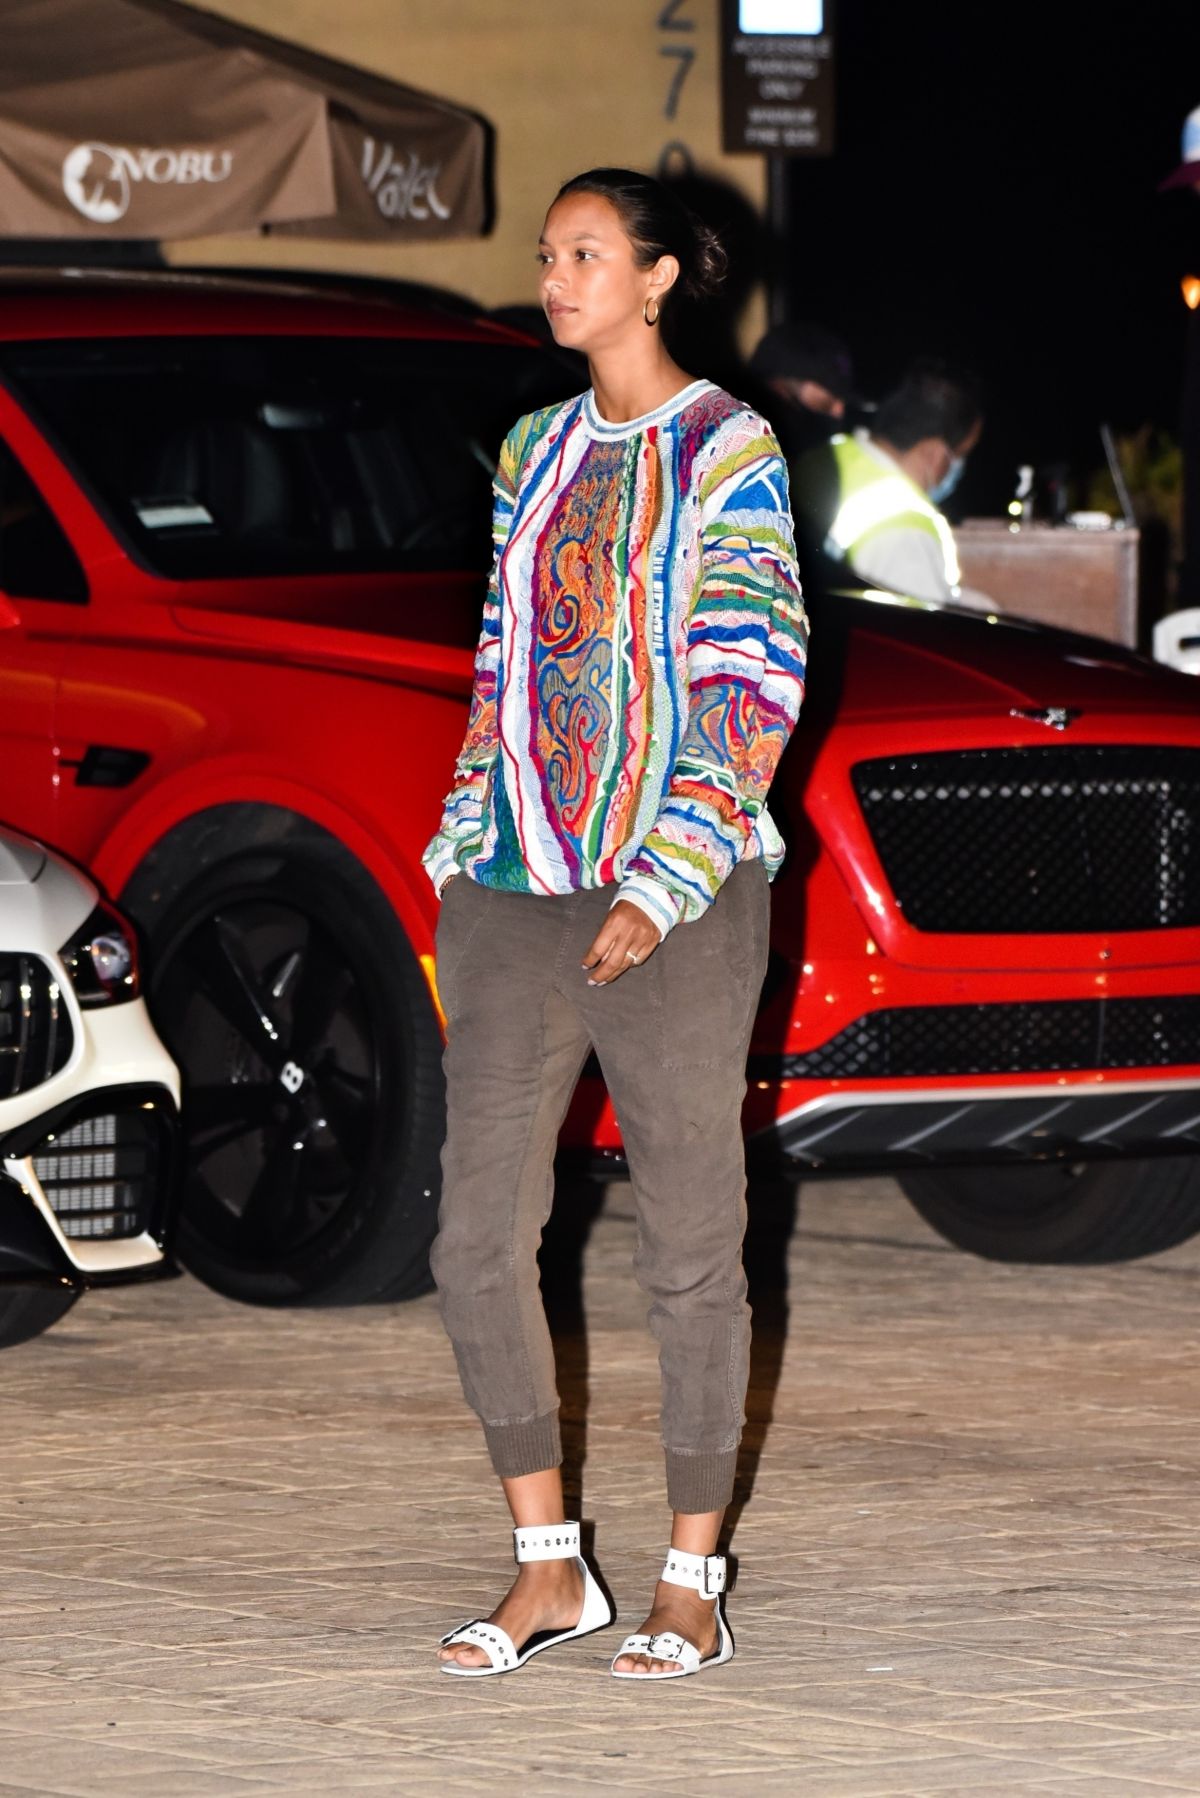 Lais Ribeiro Out for Dinner at Nobu in Malibu 2020/06/14